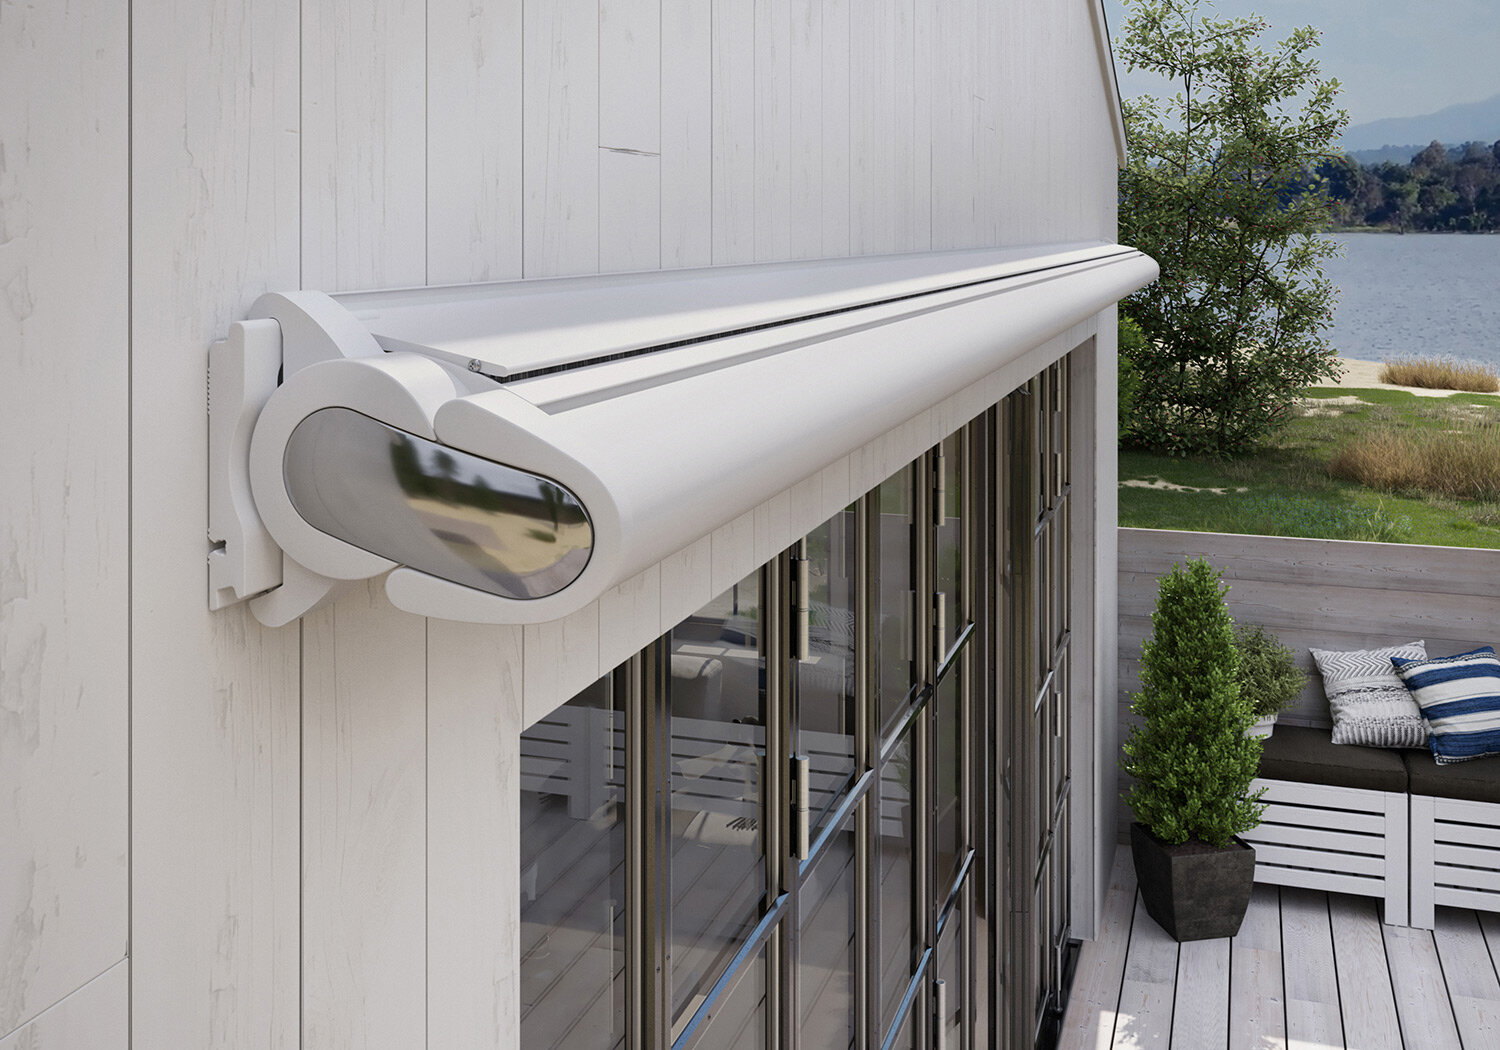 Motorised Awnings Surrey. We supply and install a wide range of electric awnings for patios and balconies, as well as pergolas, across Surrey from leading manufacturers such as Markilux. 